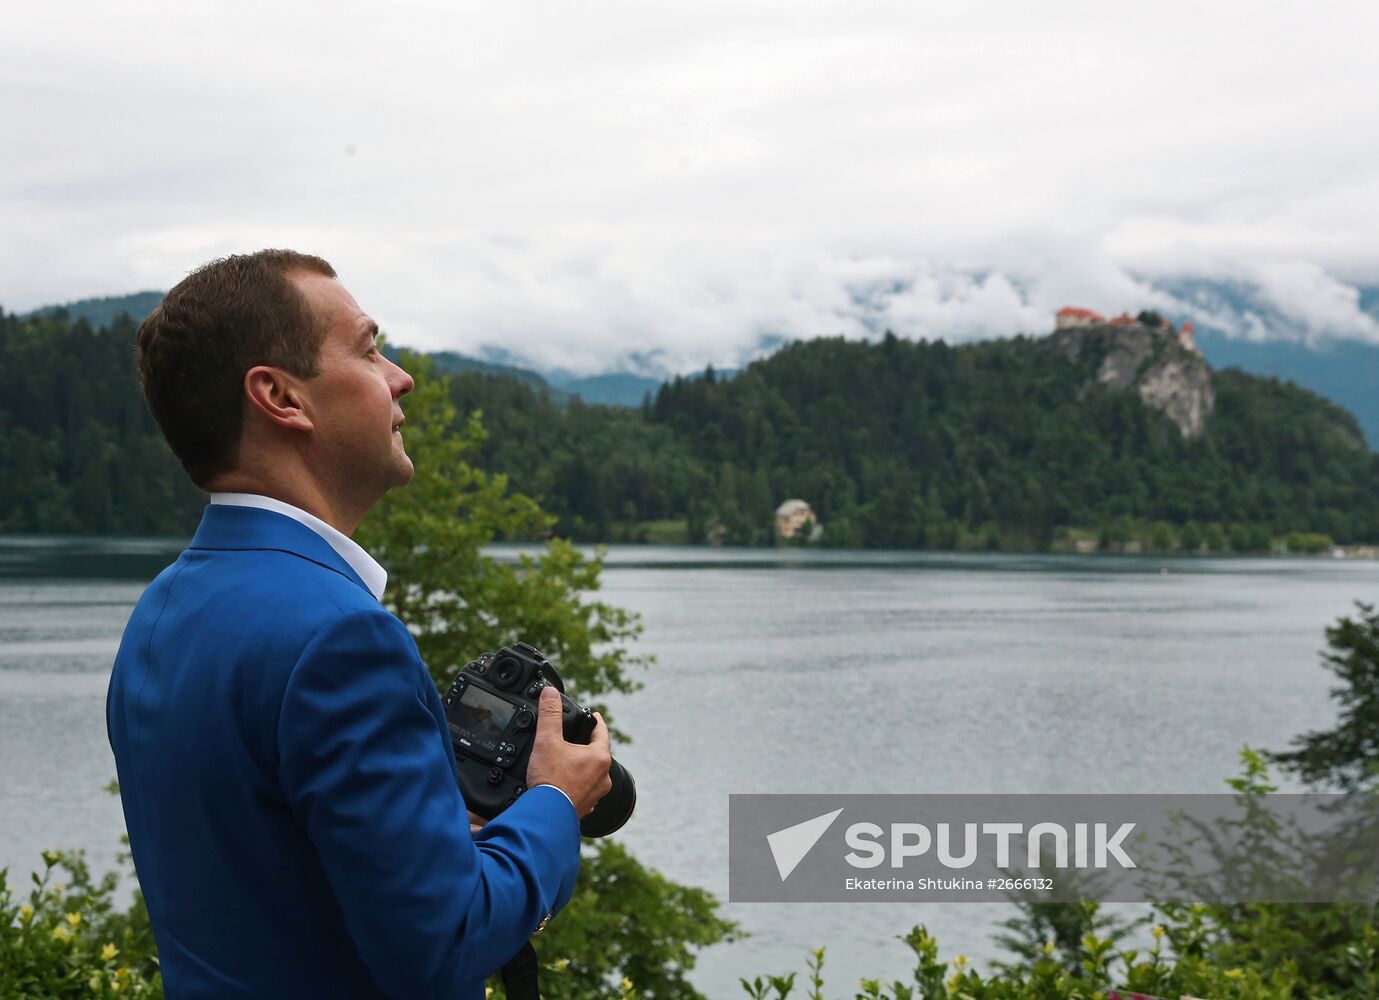 Russian Prime Minister Dmitry Medvedev's working visit to Slovenia